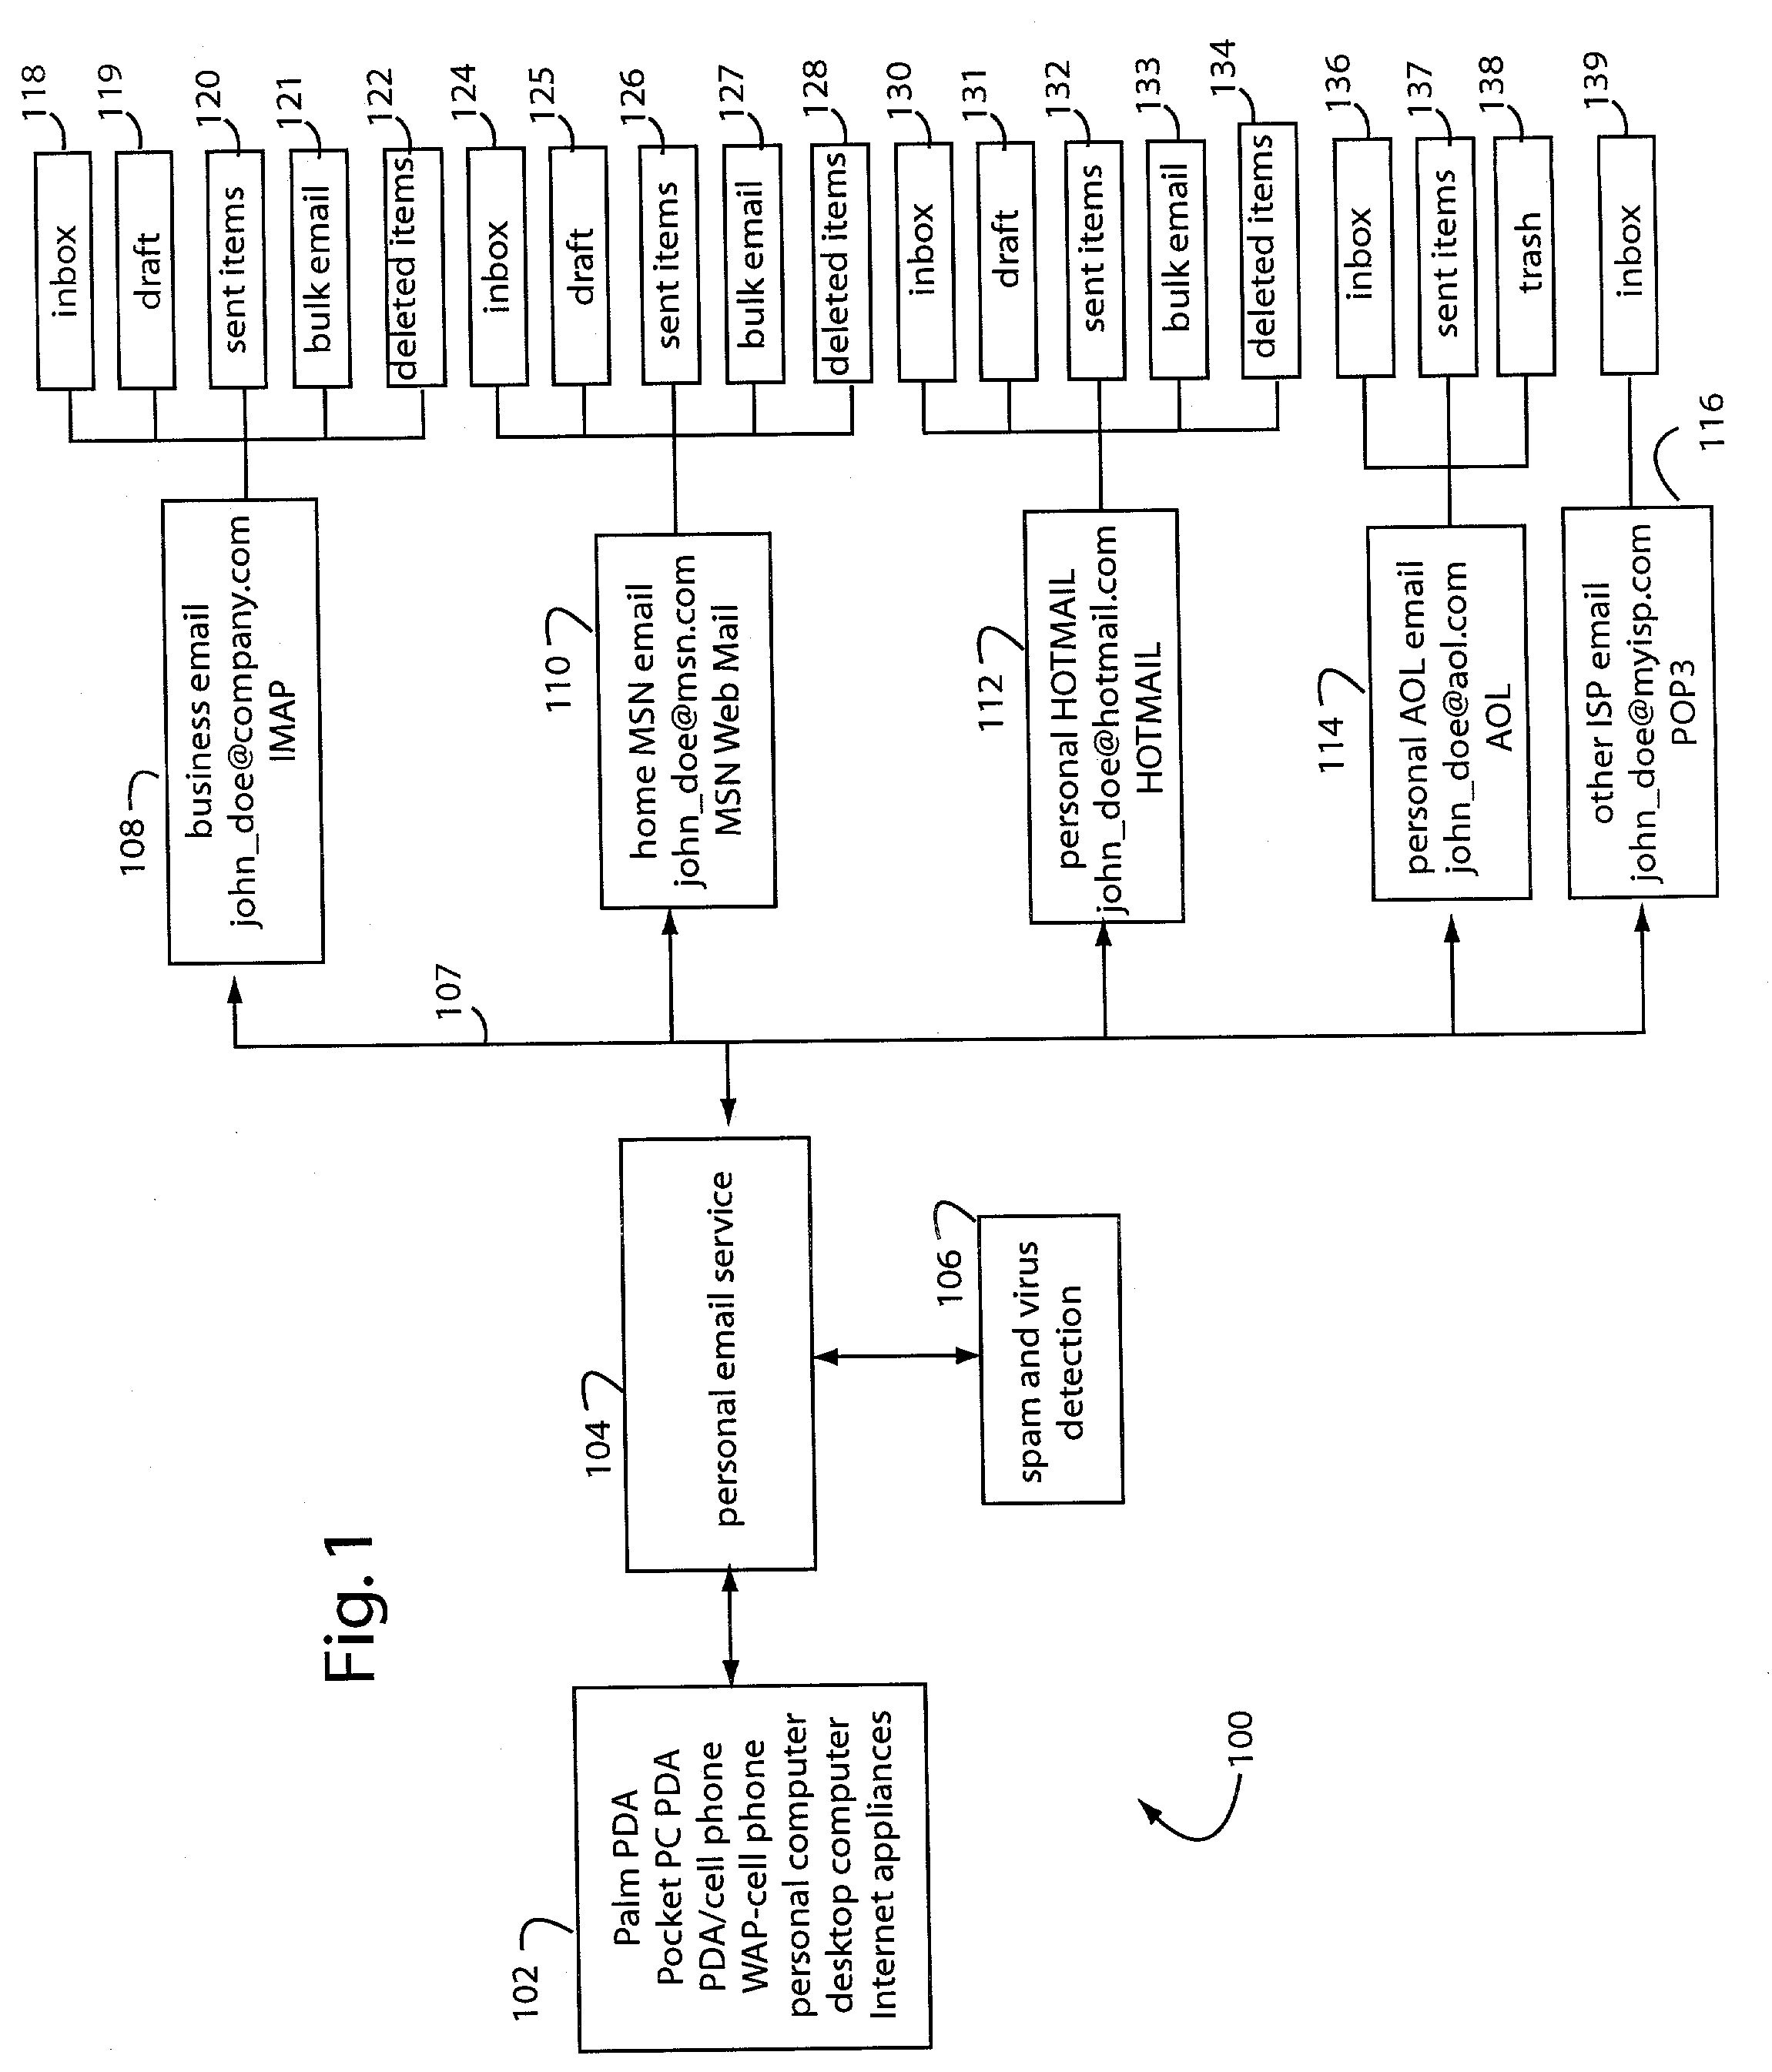 Personal e-mail system and method